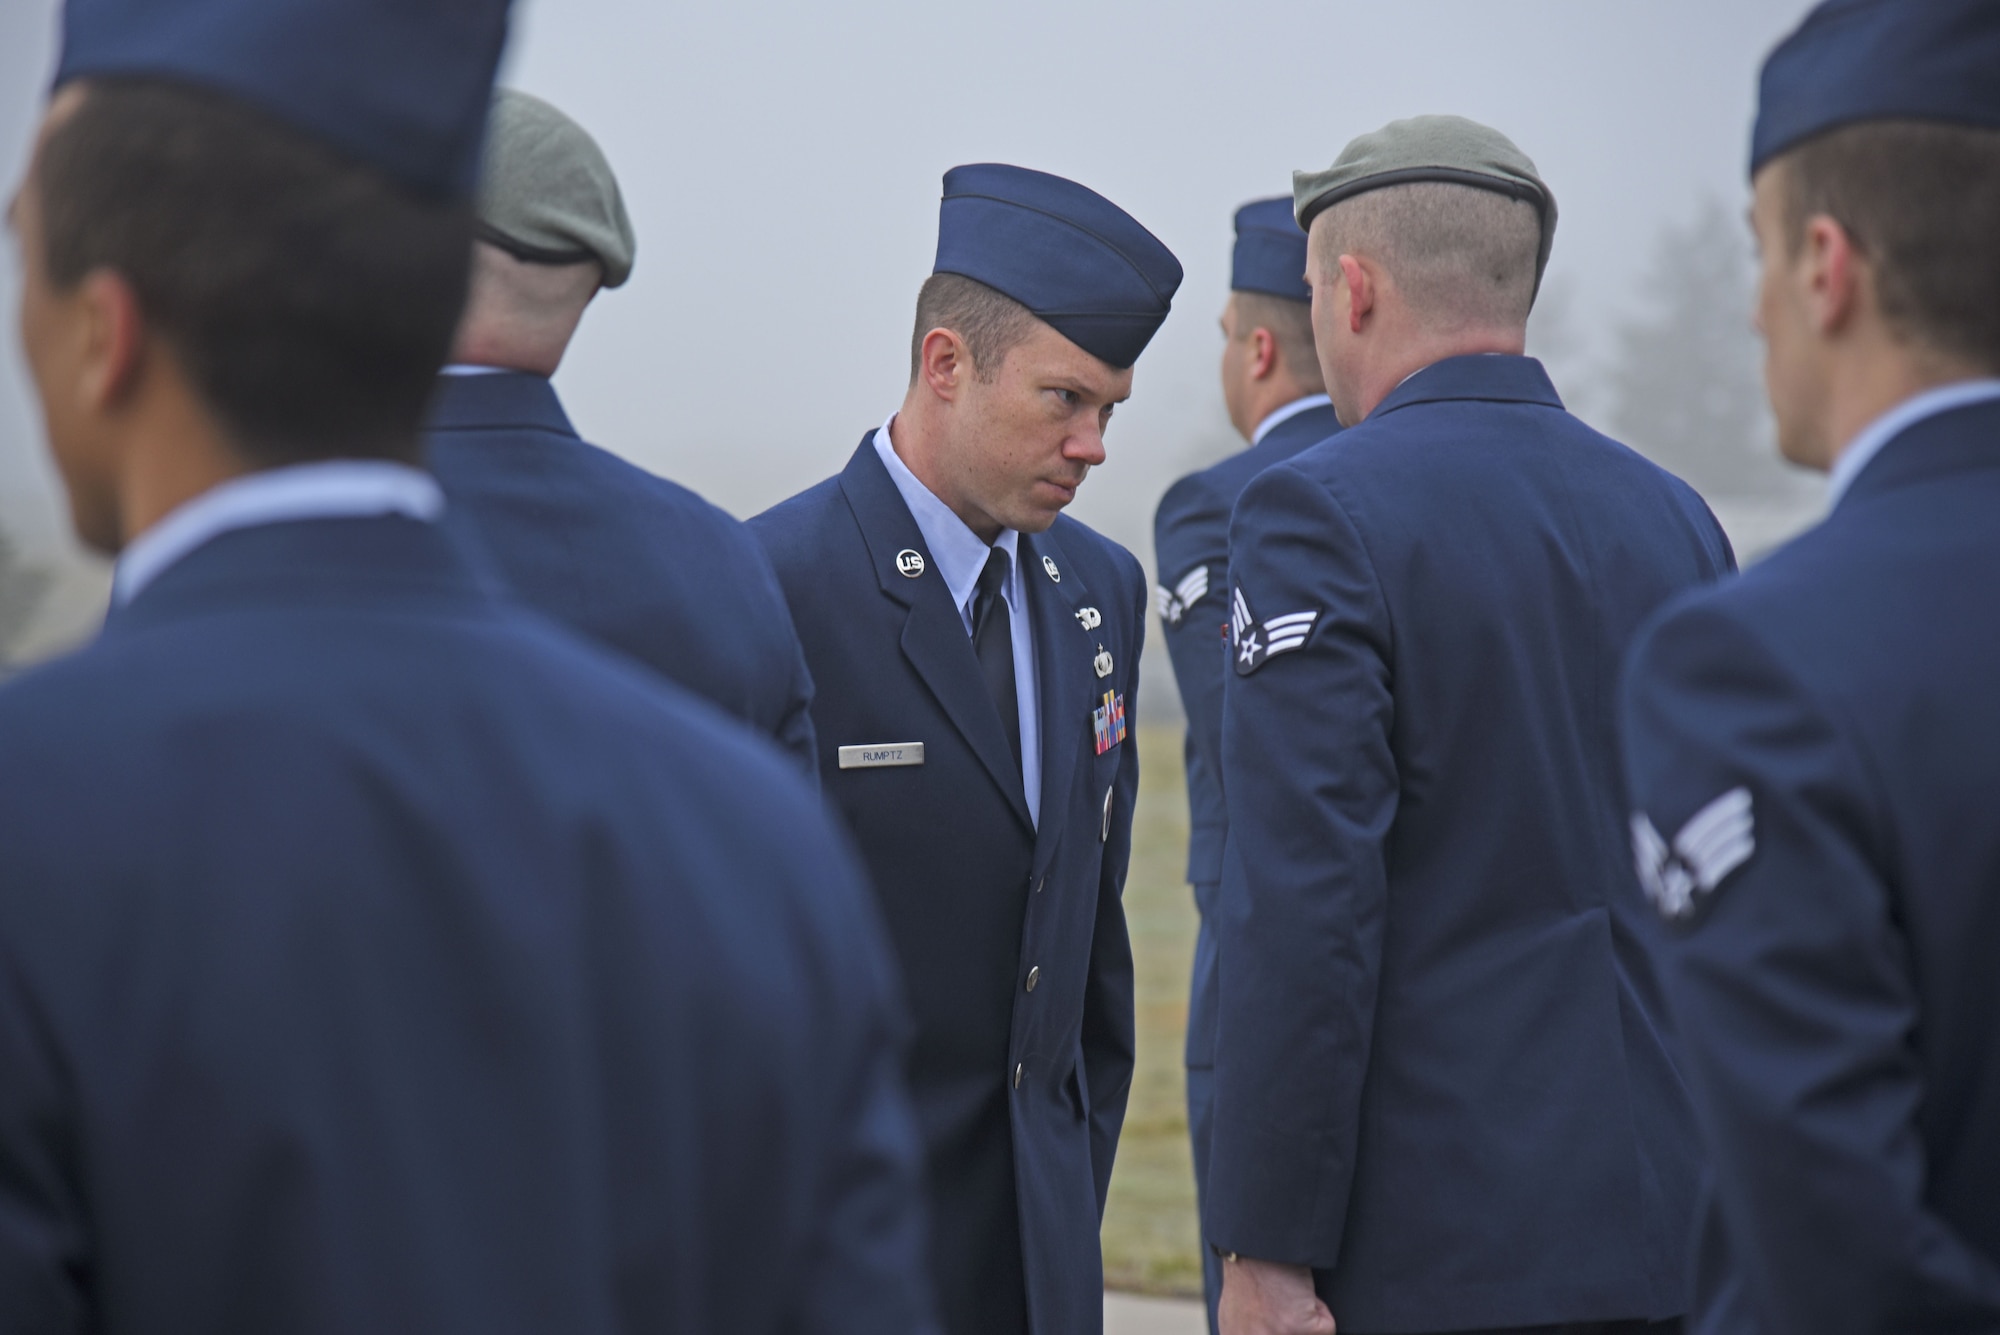 Staff Sgt. Matthew Rumptz, 92nd Force Support Squadron Airman Leadership School instructor, conducts a uniform inspection as one of the graduation requirements of ALS Nov. 21, 2017, at Fairchild Air Force Base, Washington. ALS is an in-house course that prepares senior airmen to be professional, war-fighting Airmen who can supervise and lead Air Force work teams to support the employment of airpower. (U.S. Air Force photo/Senior Airman Mackenzie Richardson)